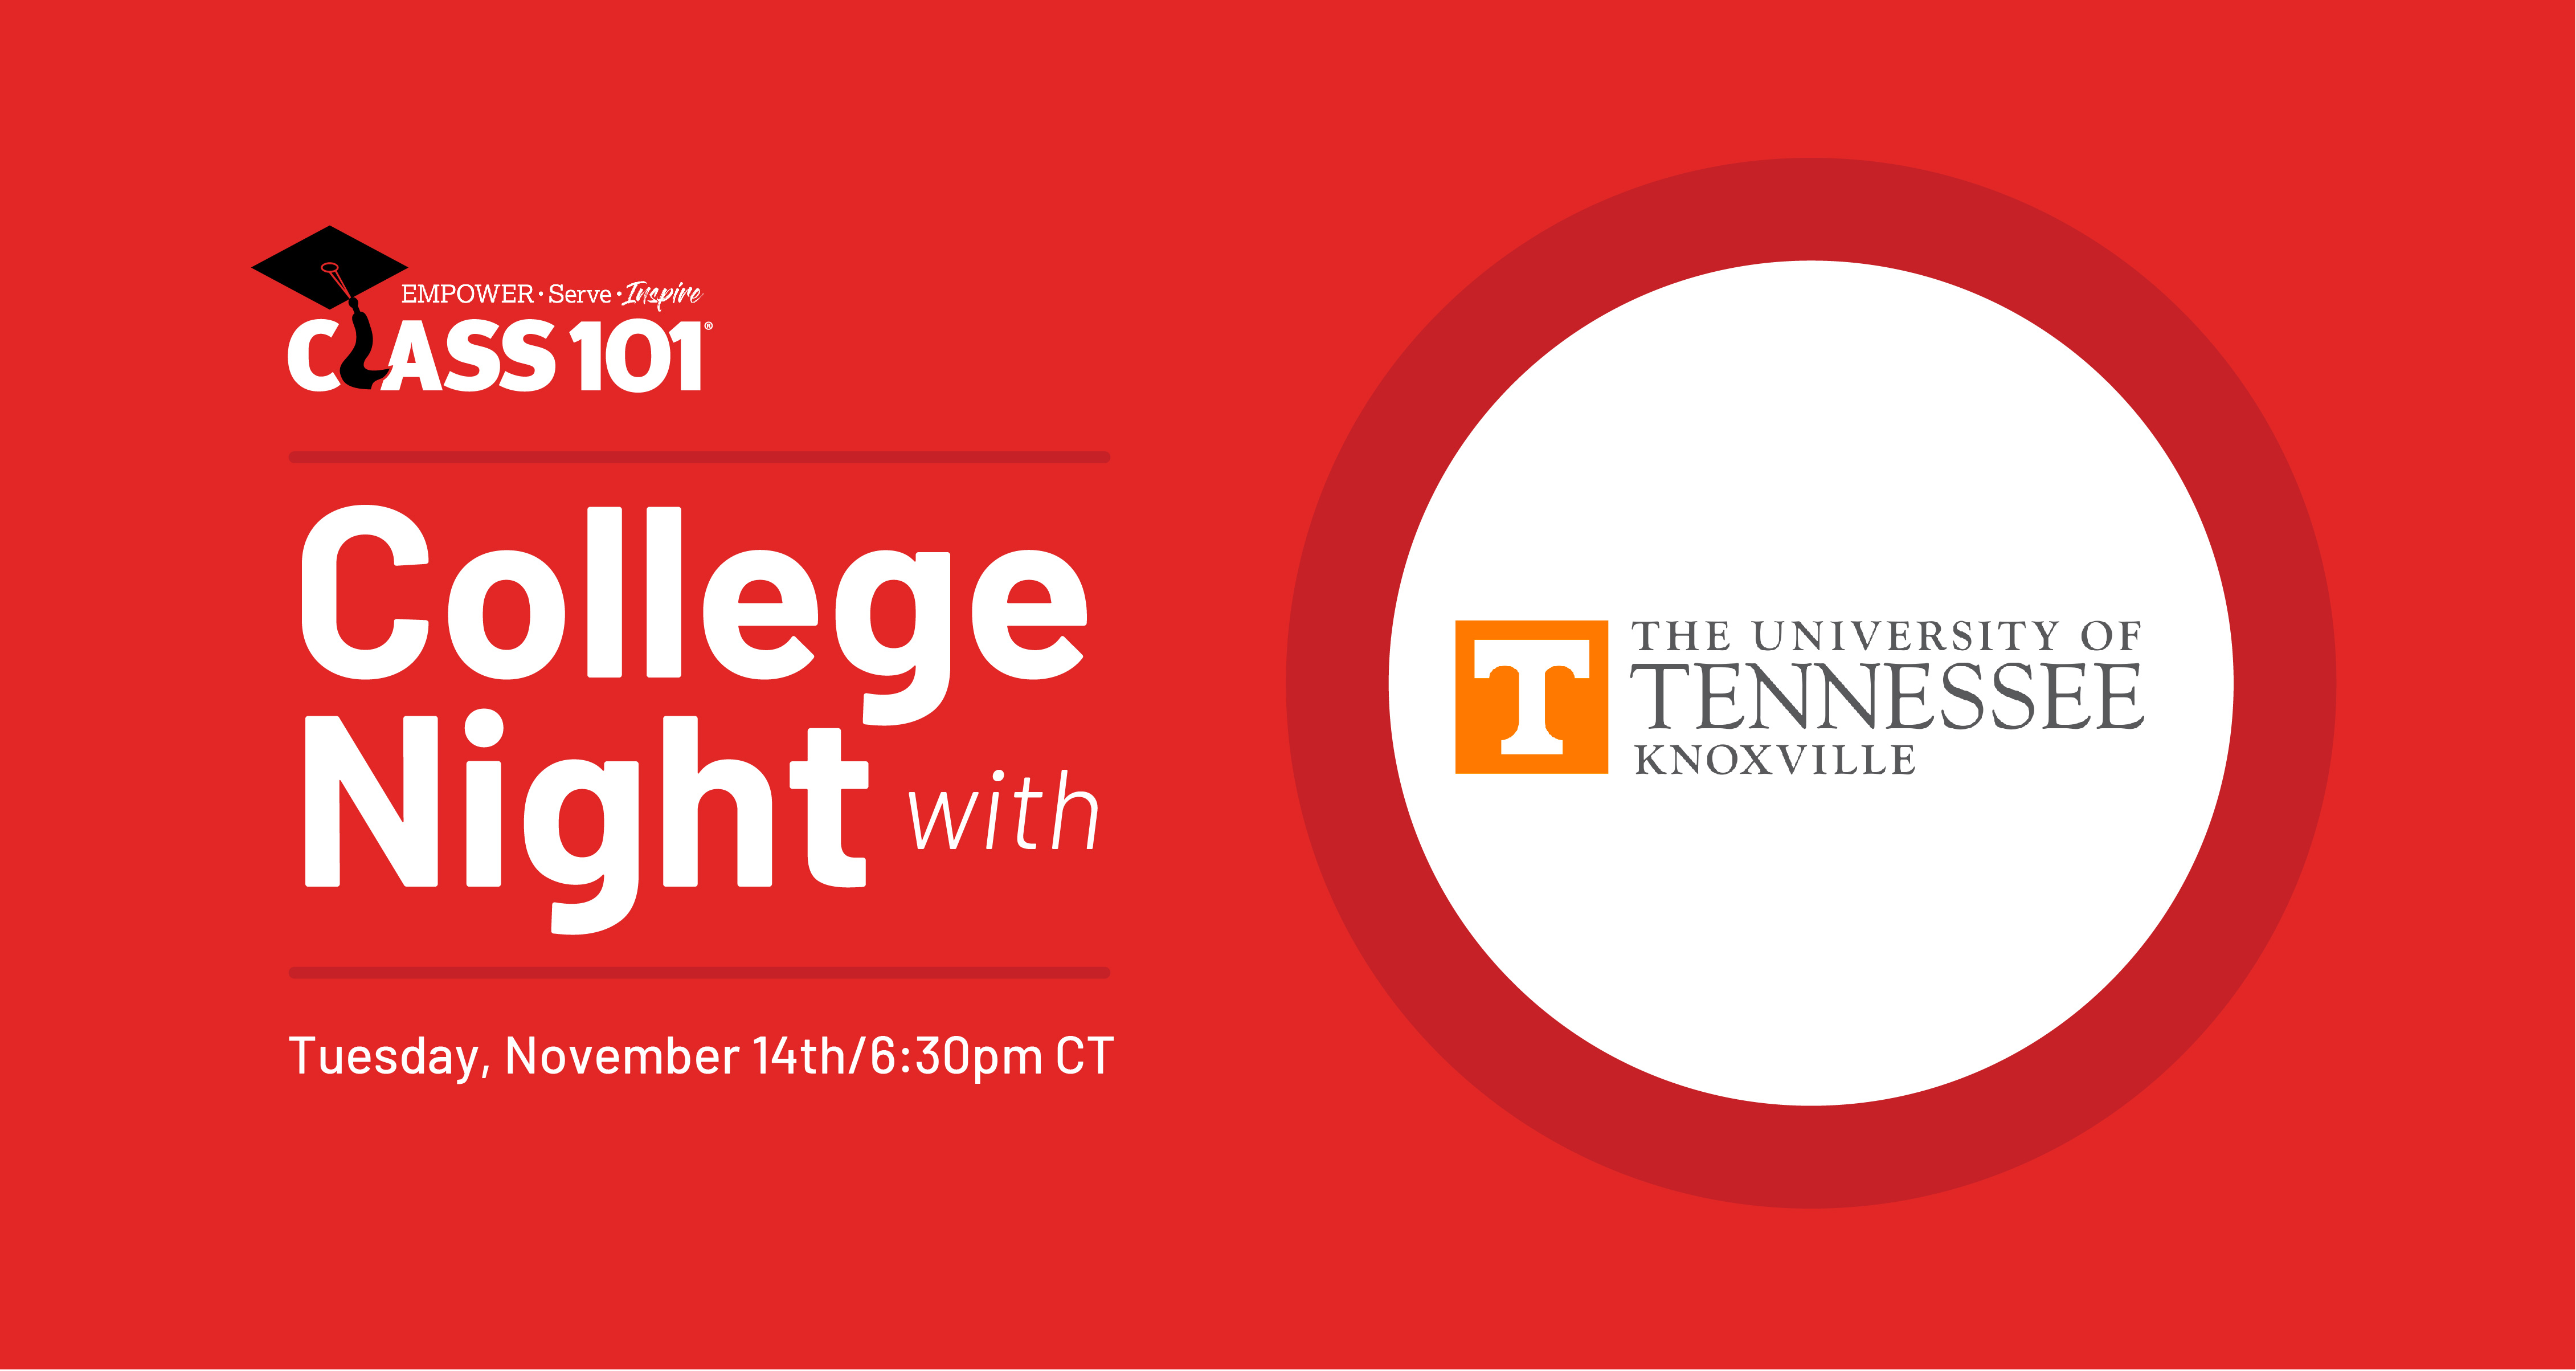 College Night with University of Tennessee